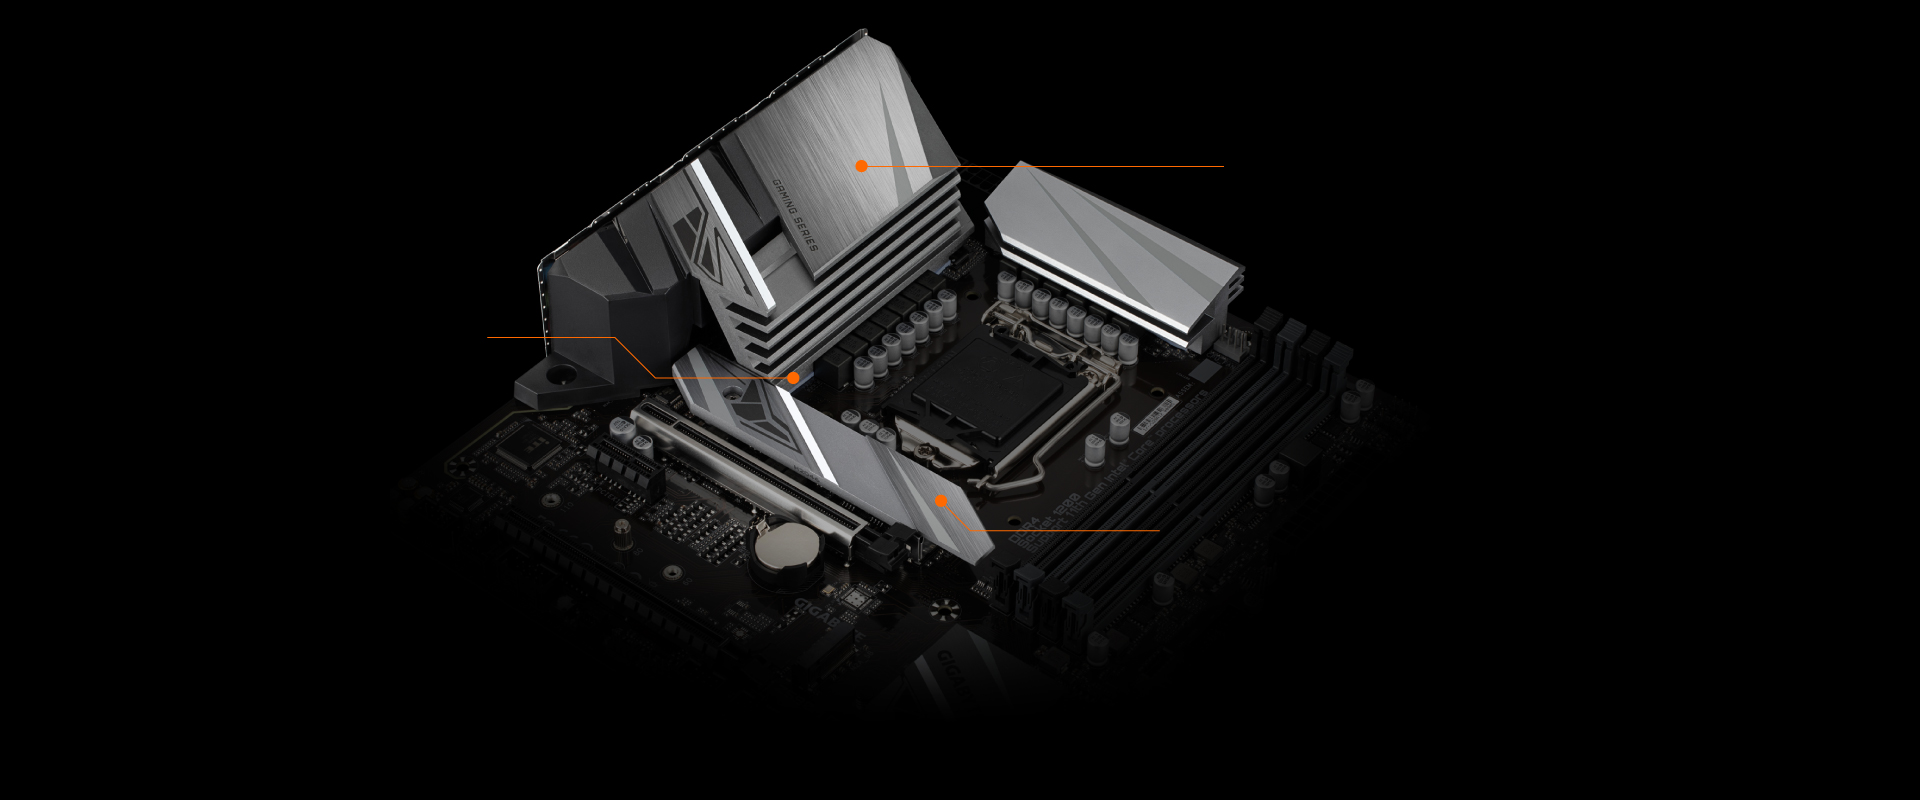 Z590M GAMING X (rev. 1.0) Key Features